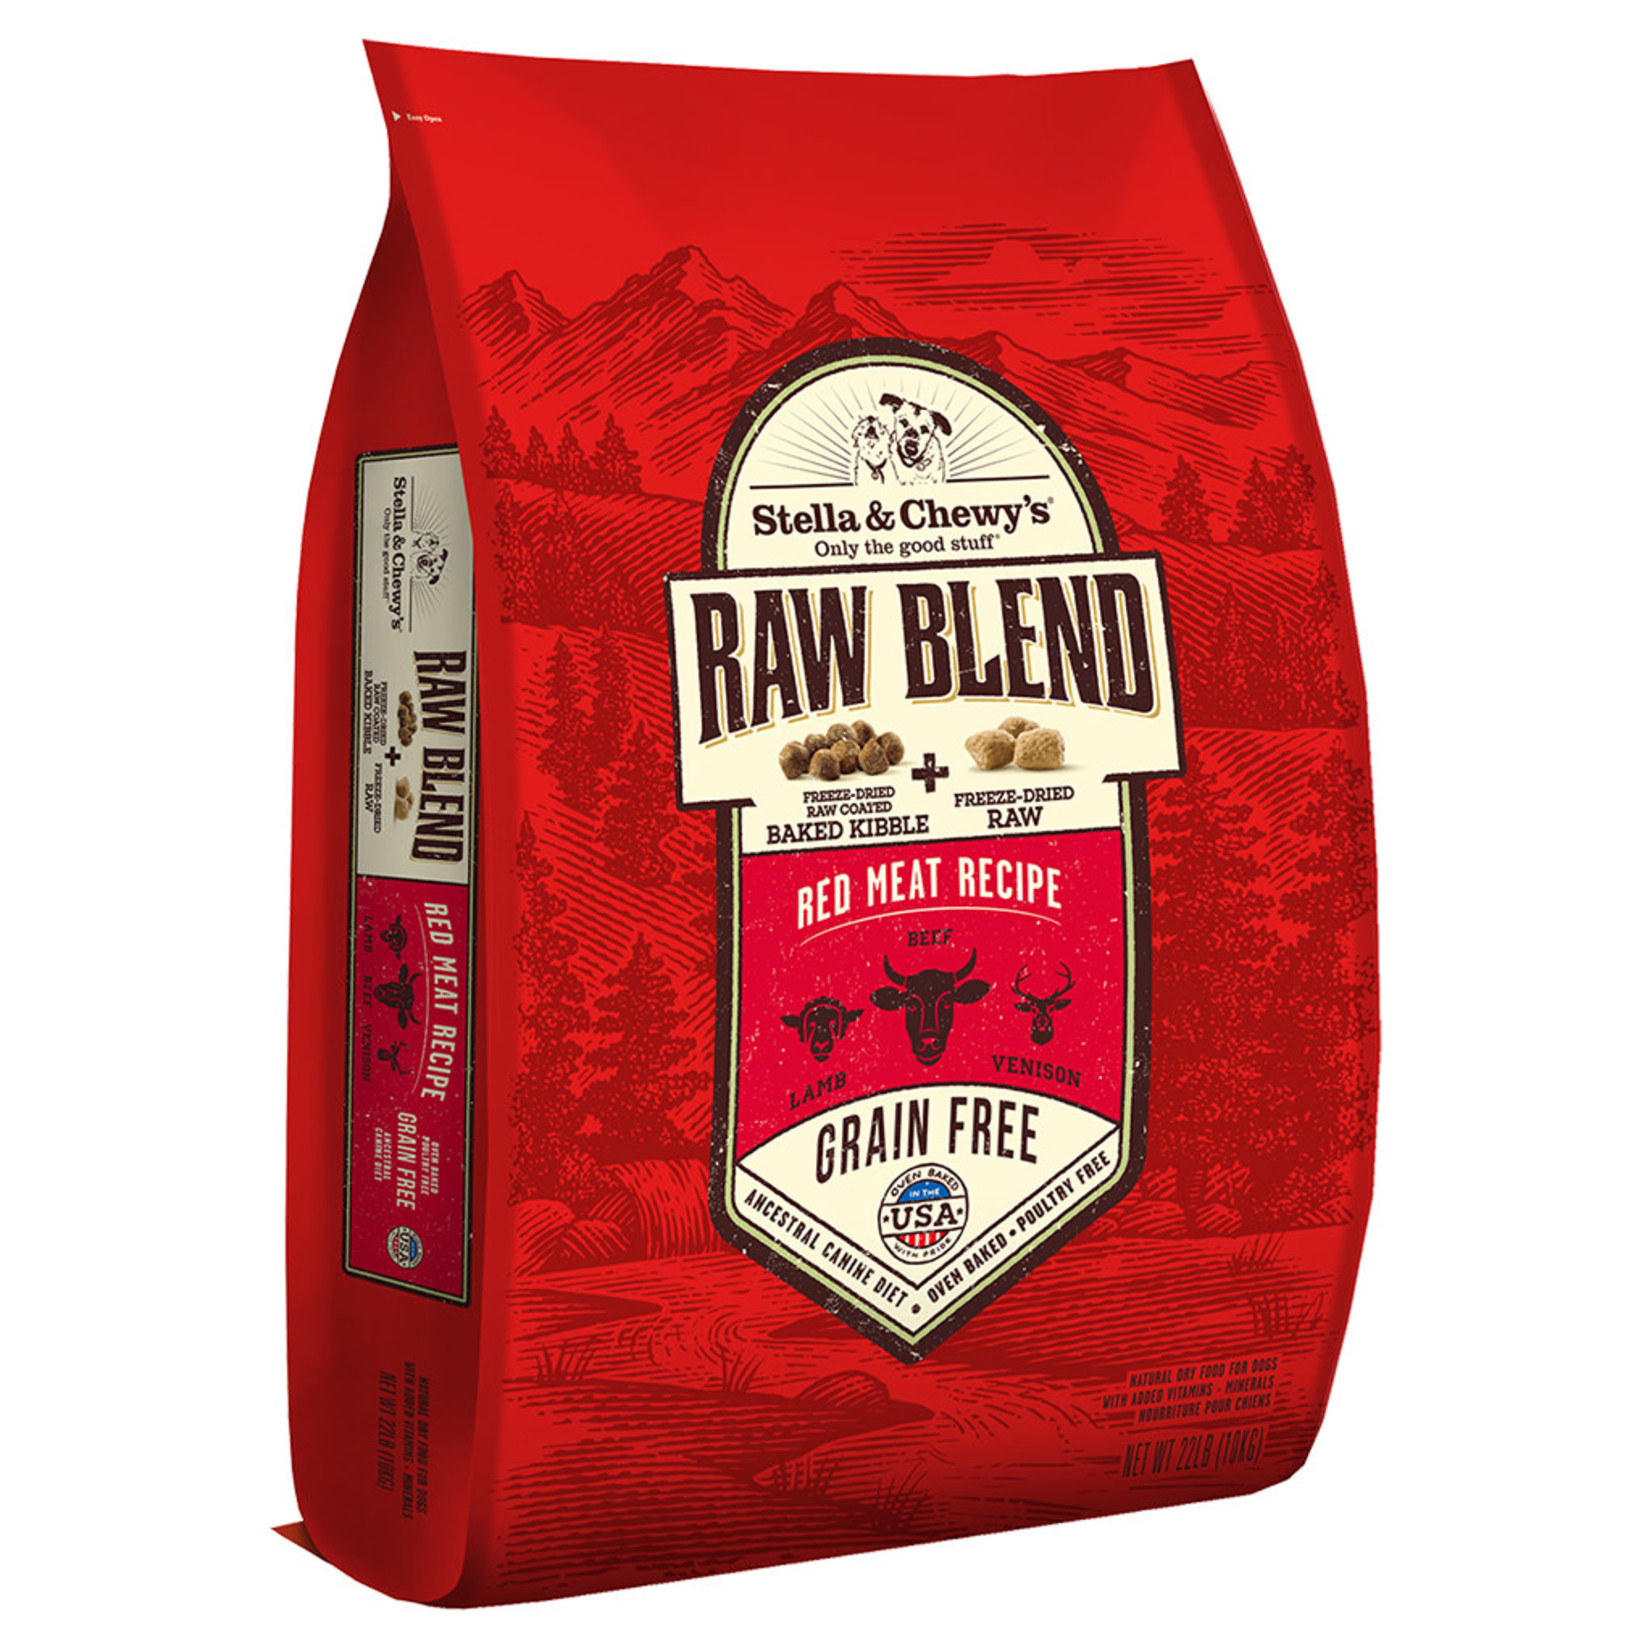 Stella & chewy's Stella & Chewy's Raw Blend Beef, Lamb & Venison 22LB